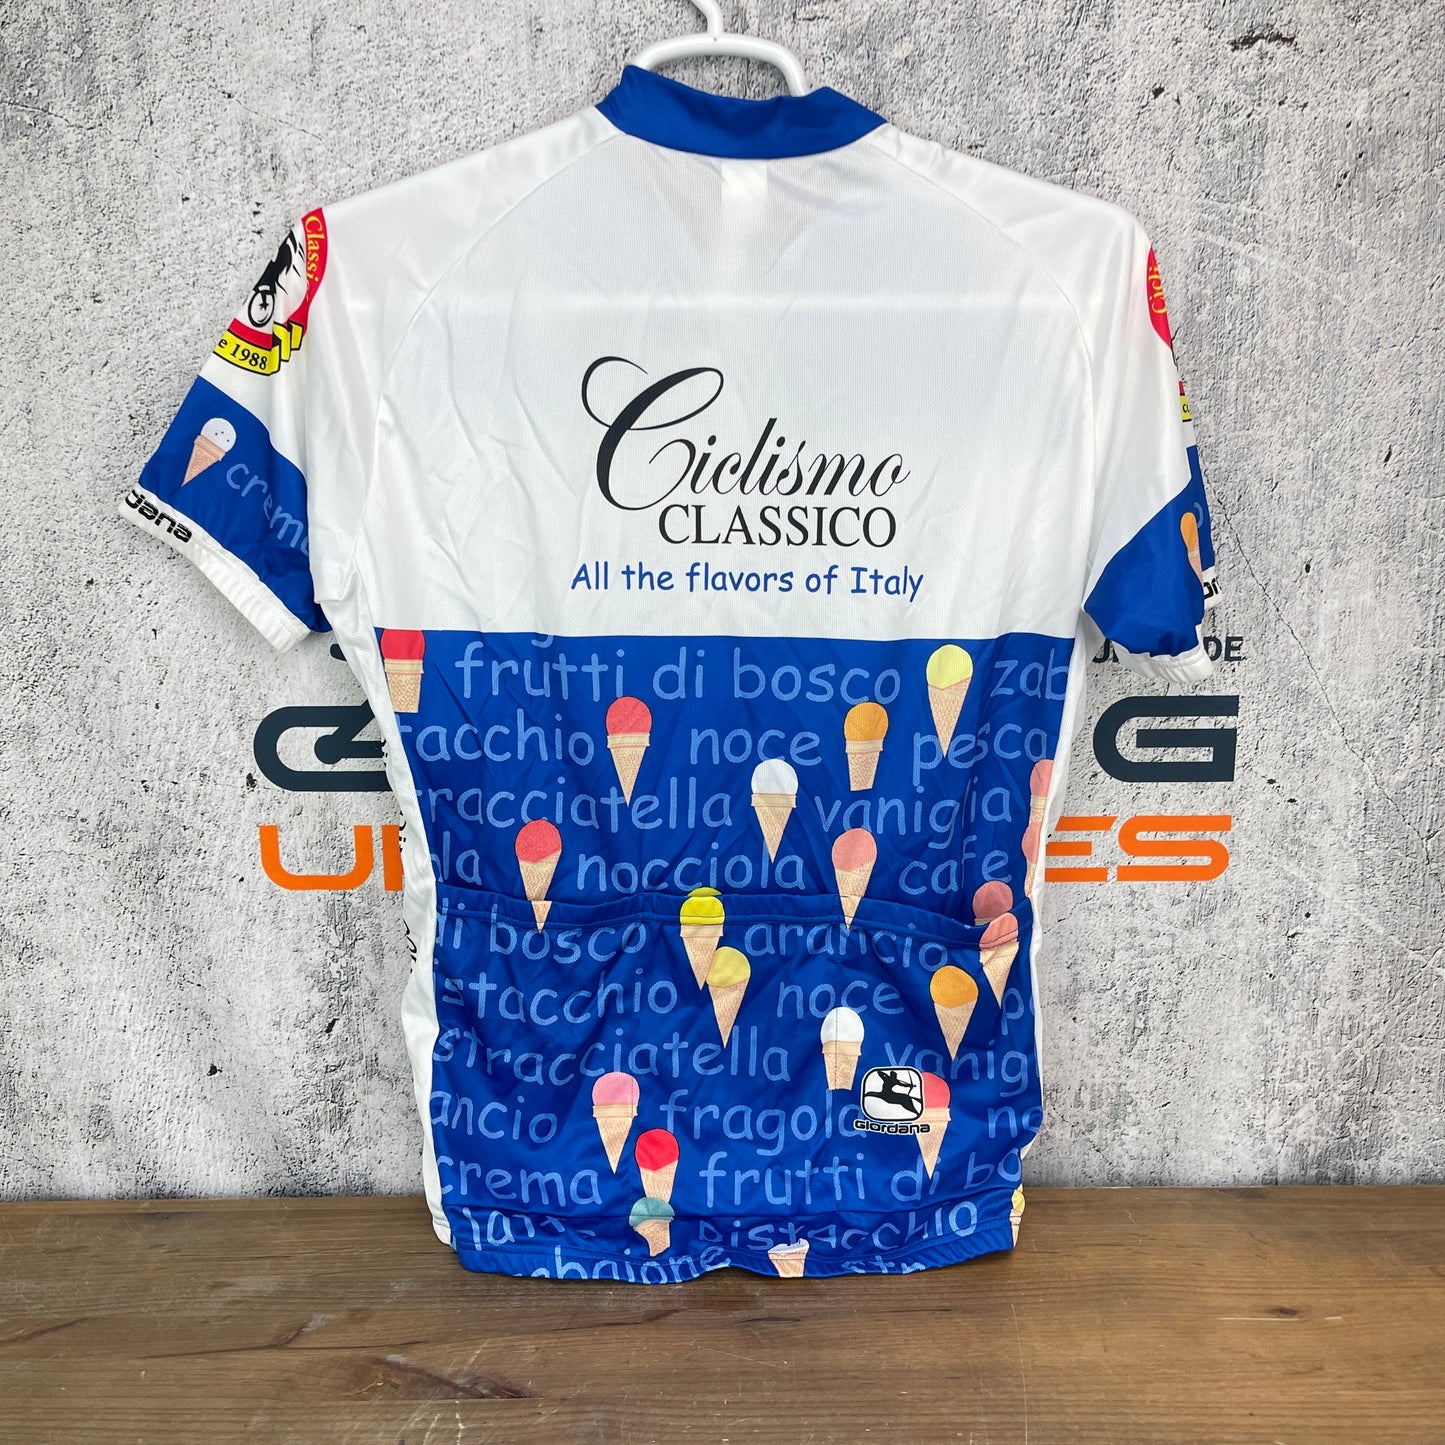 Giordana Ciclismo Classico Large Men's Cycling Jersey Short Sleeve